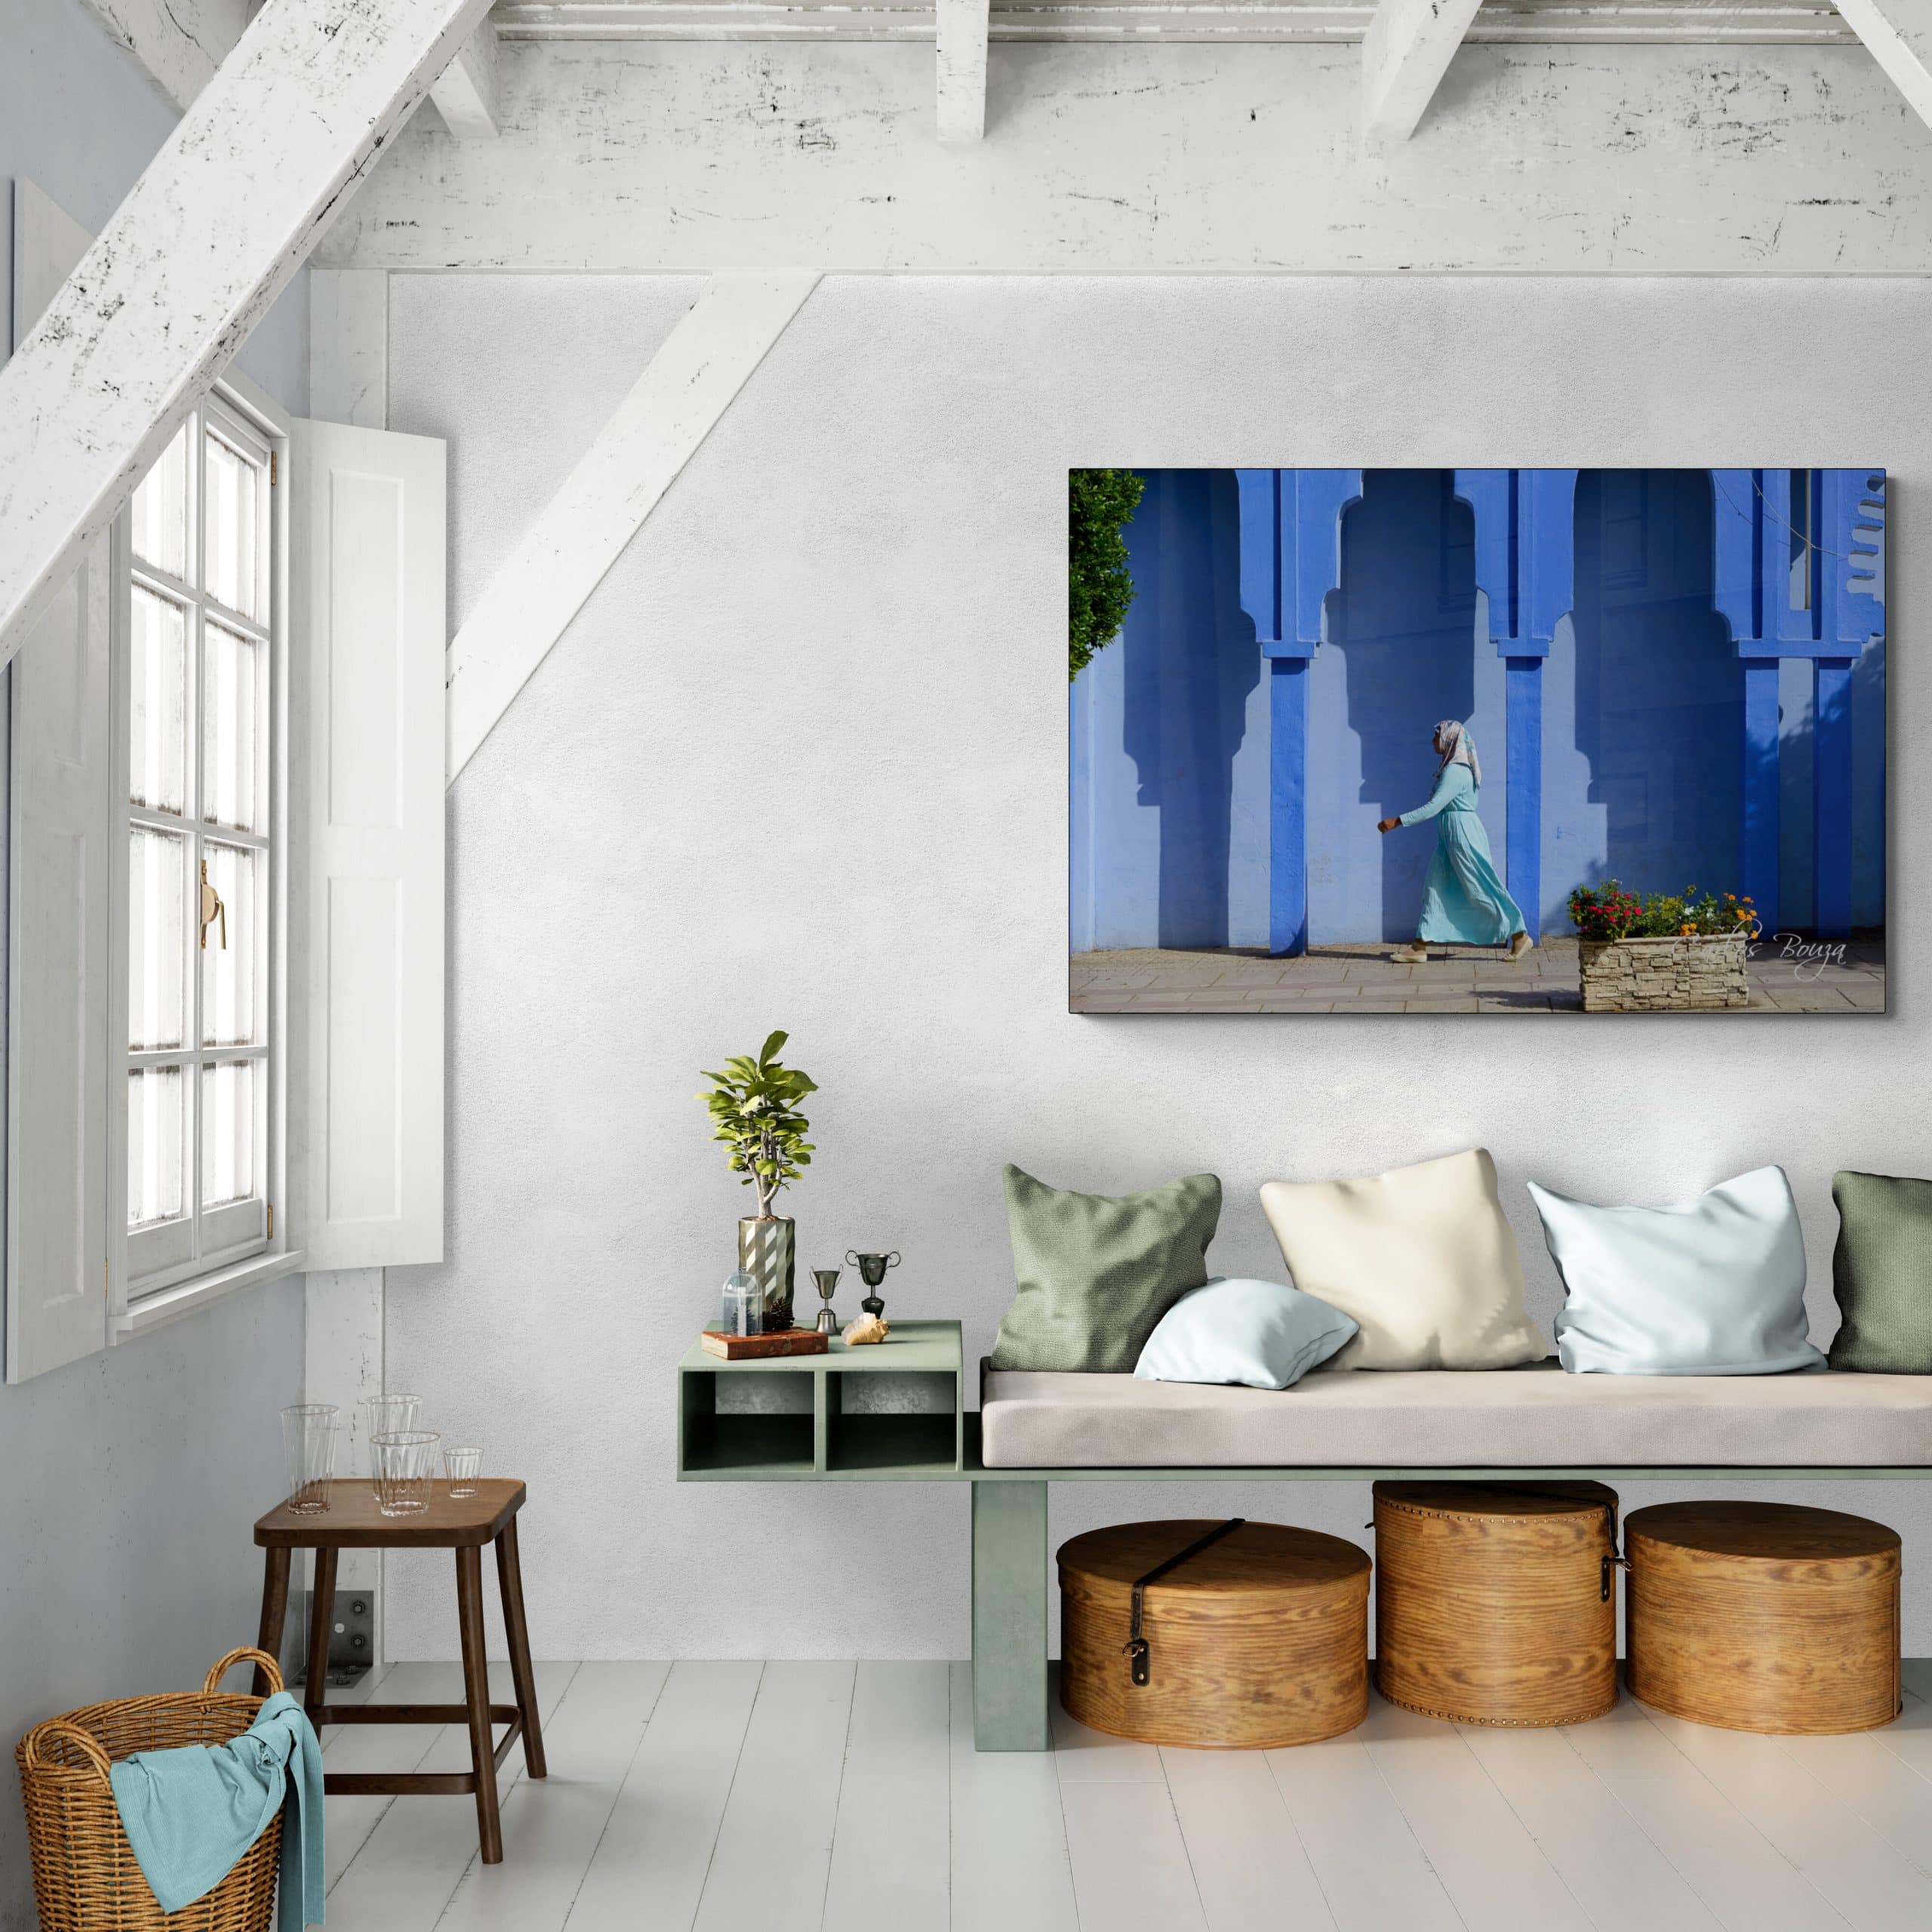 the fine art photography in different cultures and interior styles